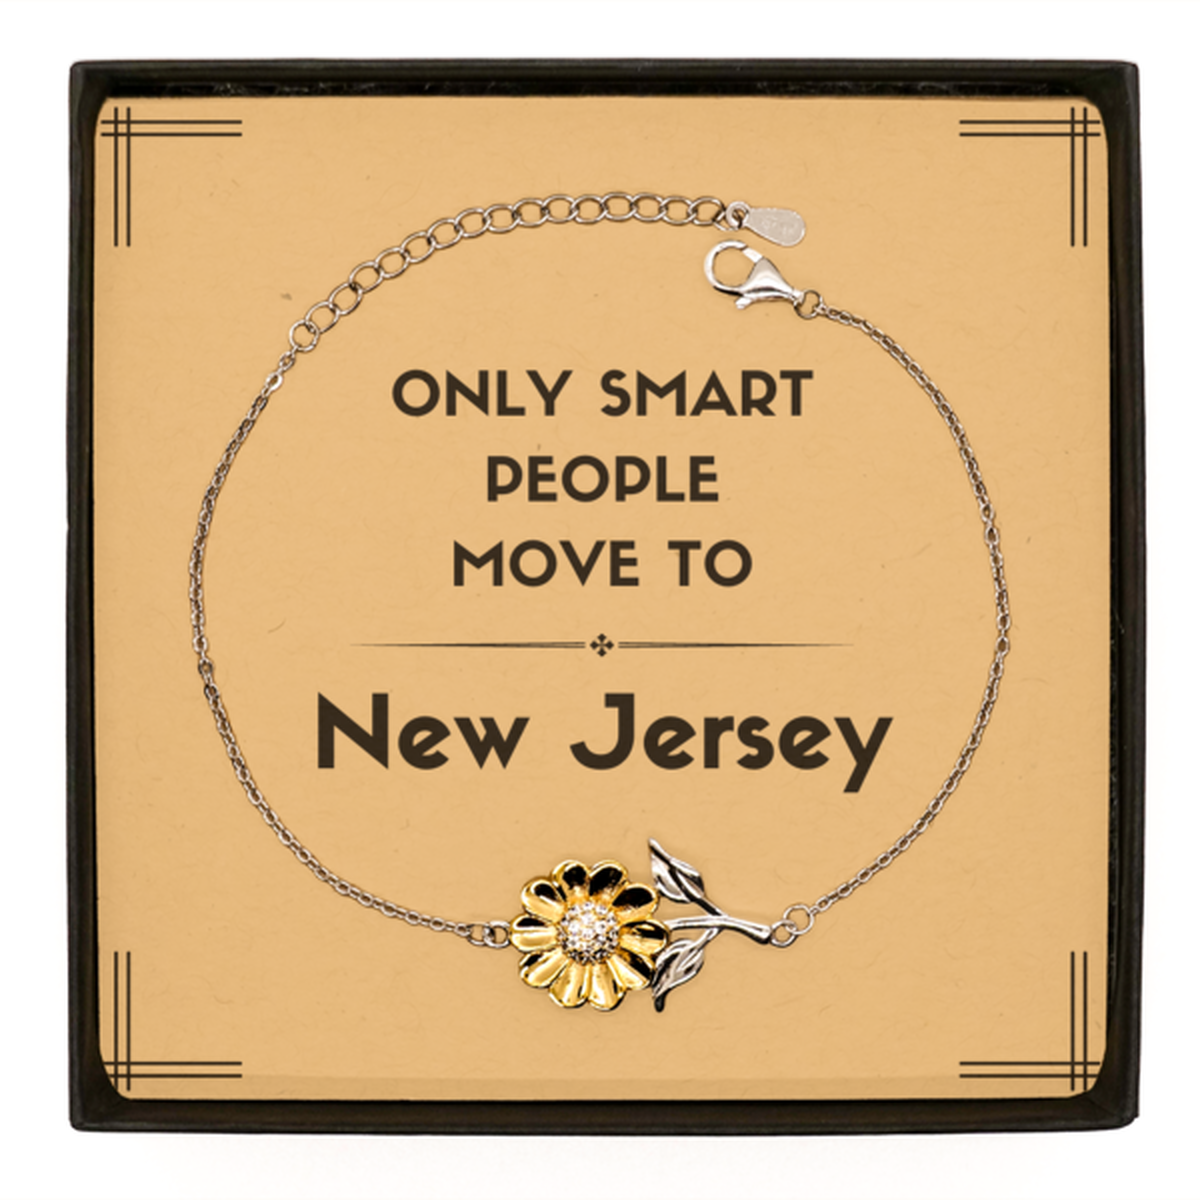 Only smart people move to New Jersey Sunflower Bracelet, Message Card Gifts For New Jersey, Move to New Jersey Gifts for Friends Coworker Funny Saying Quote